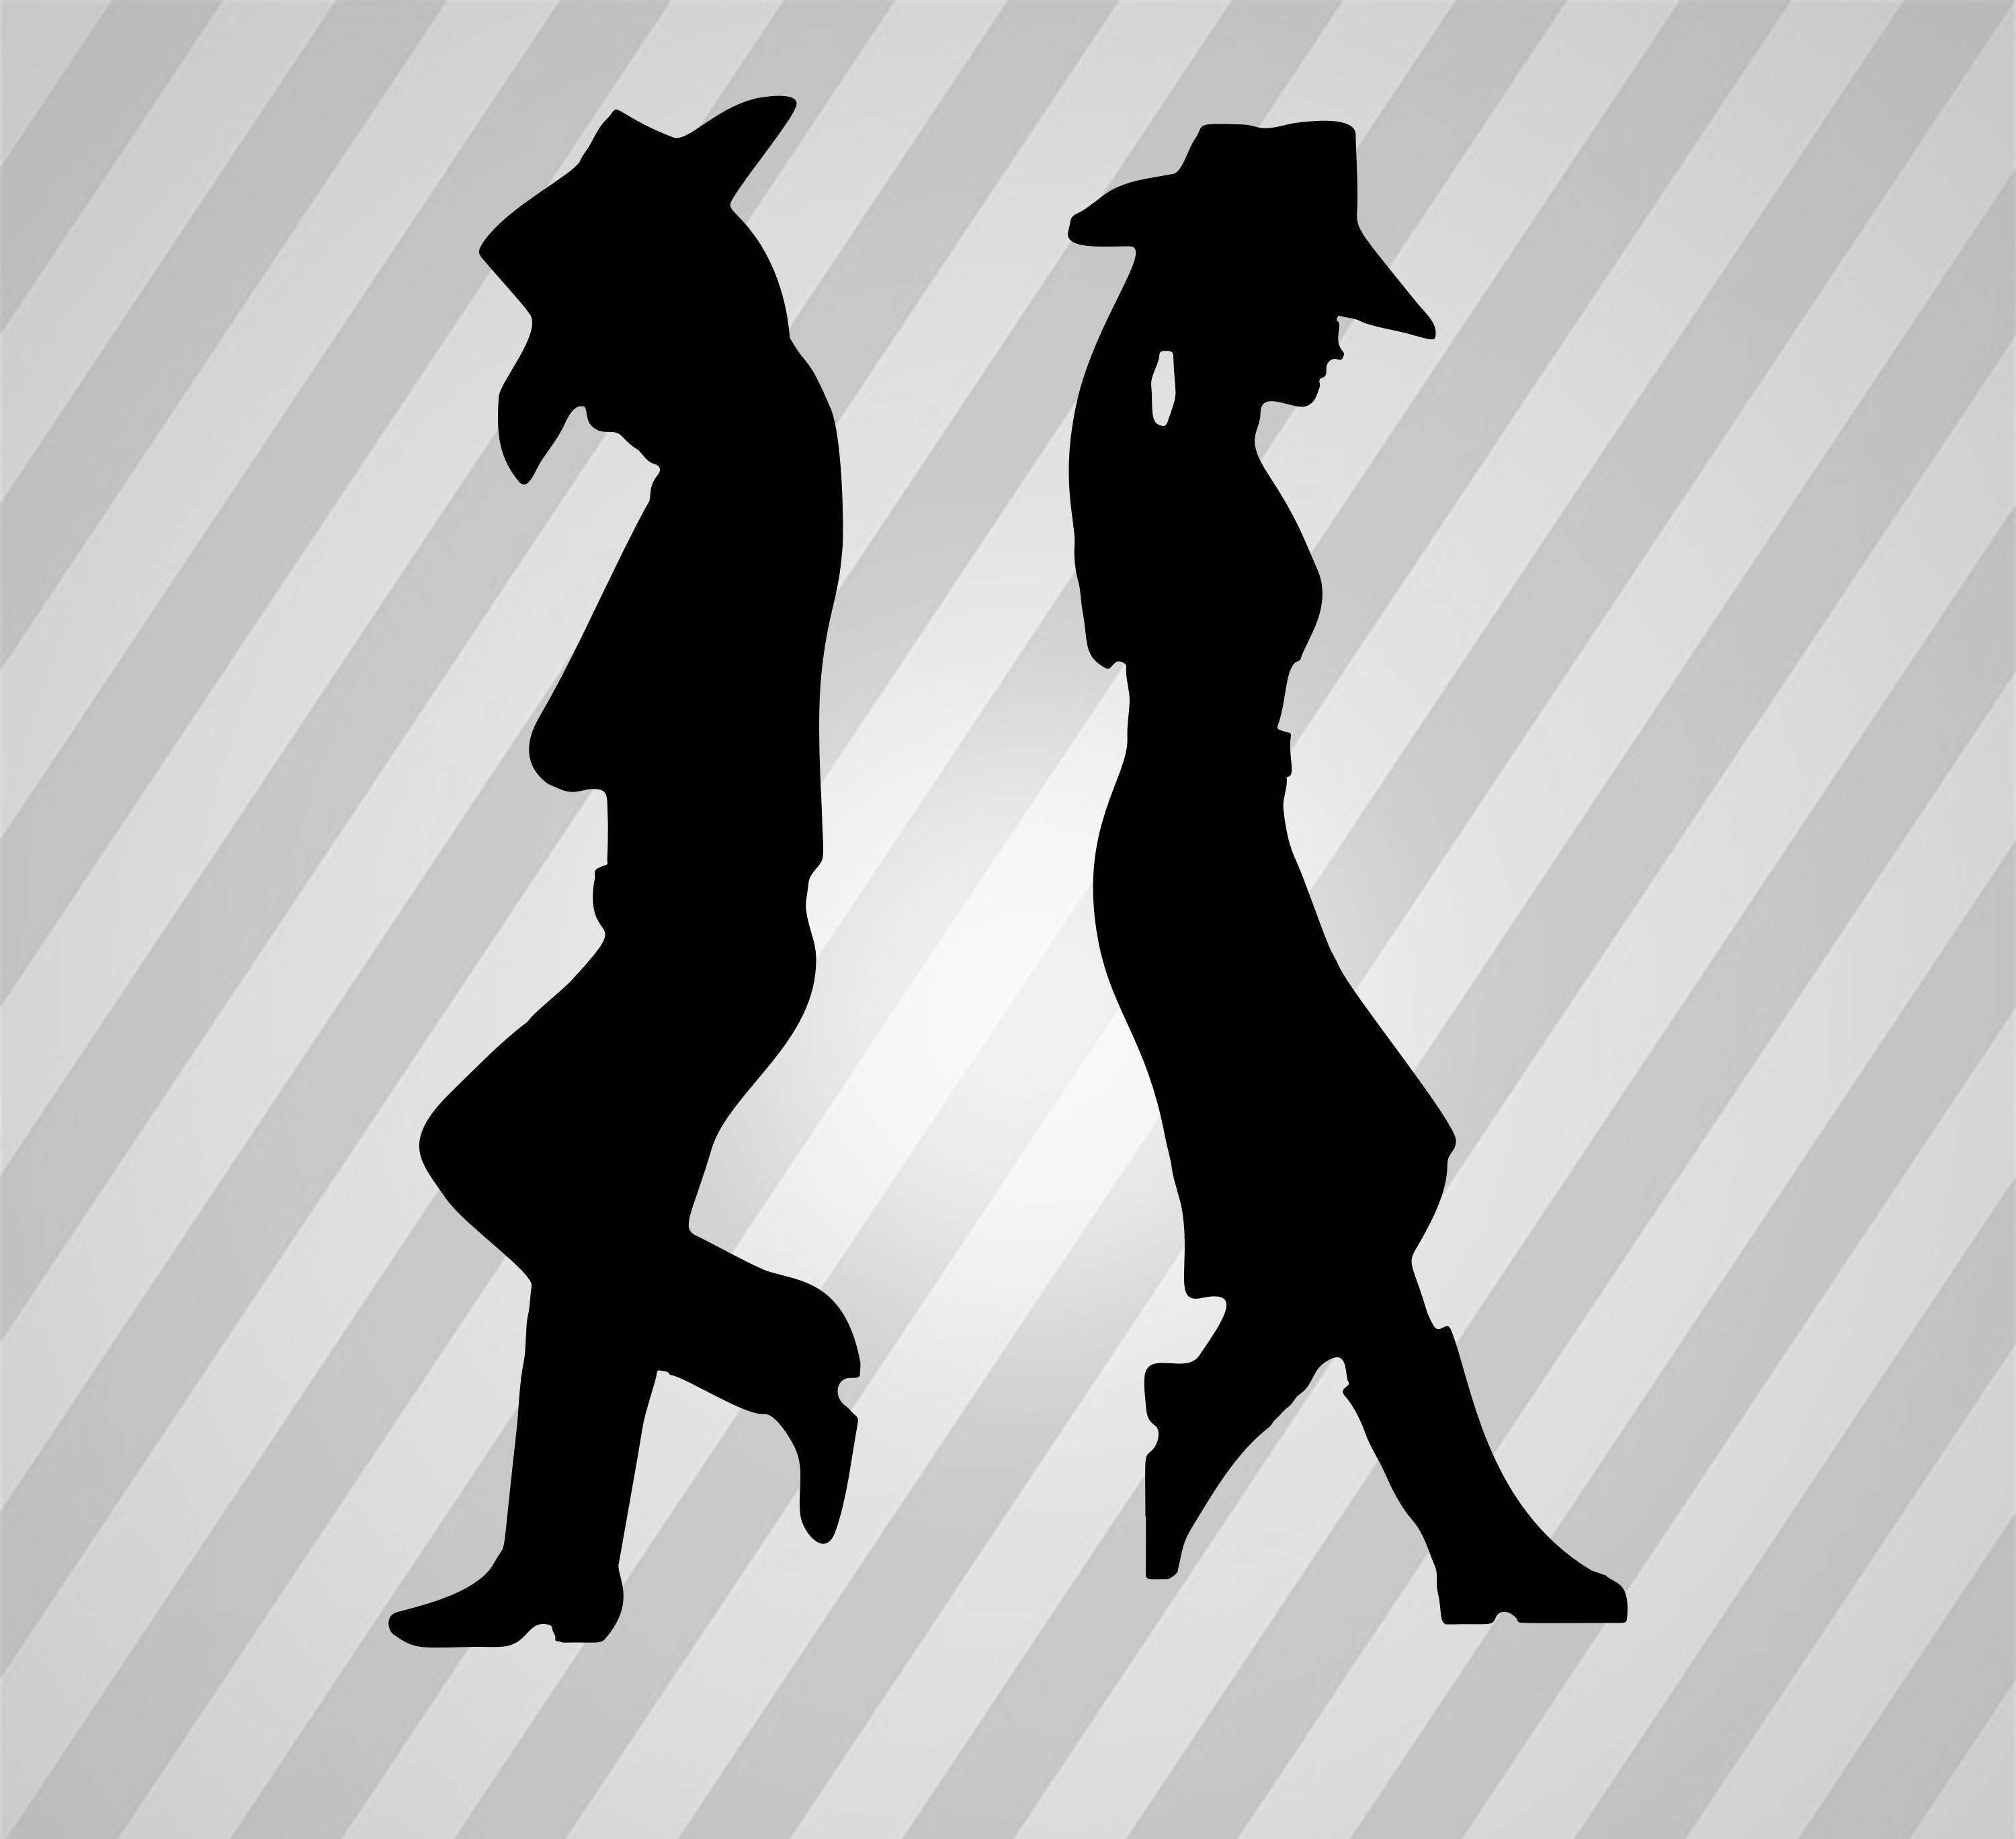 Leaning Cowboy Silhouette Vector.